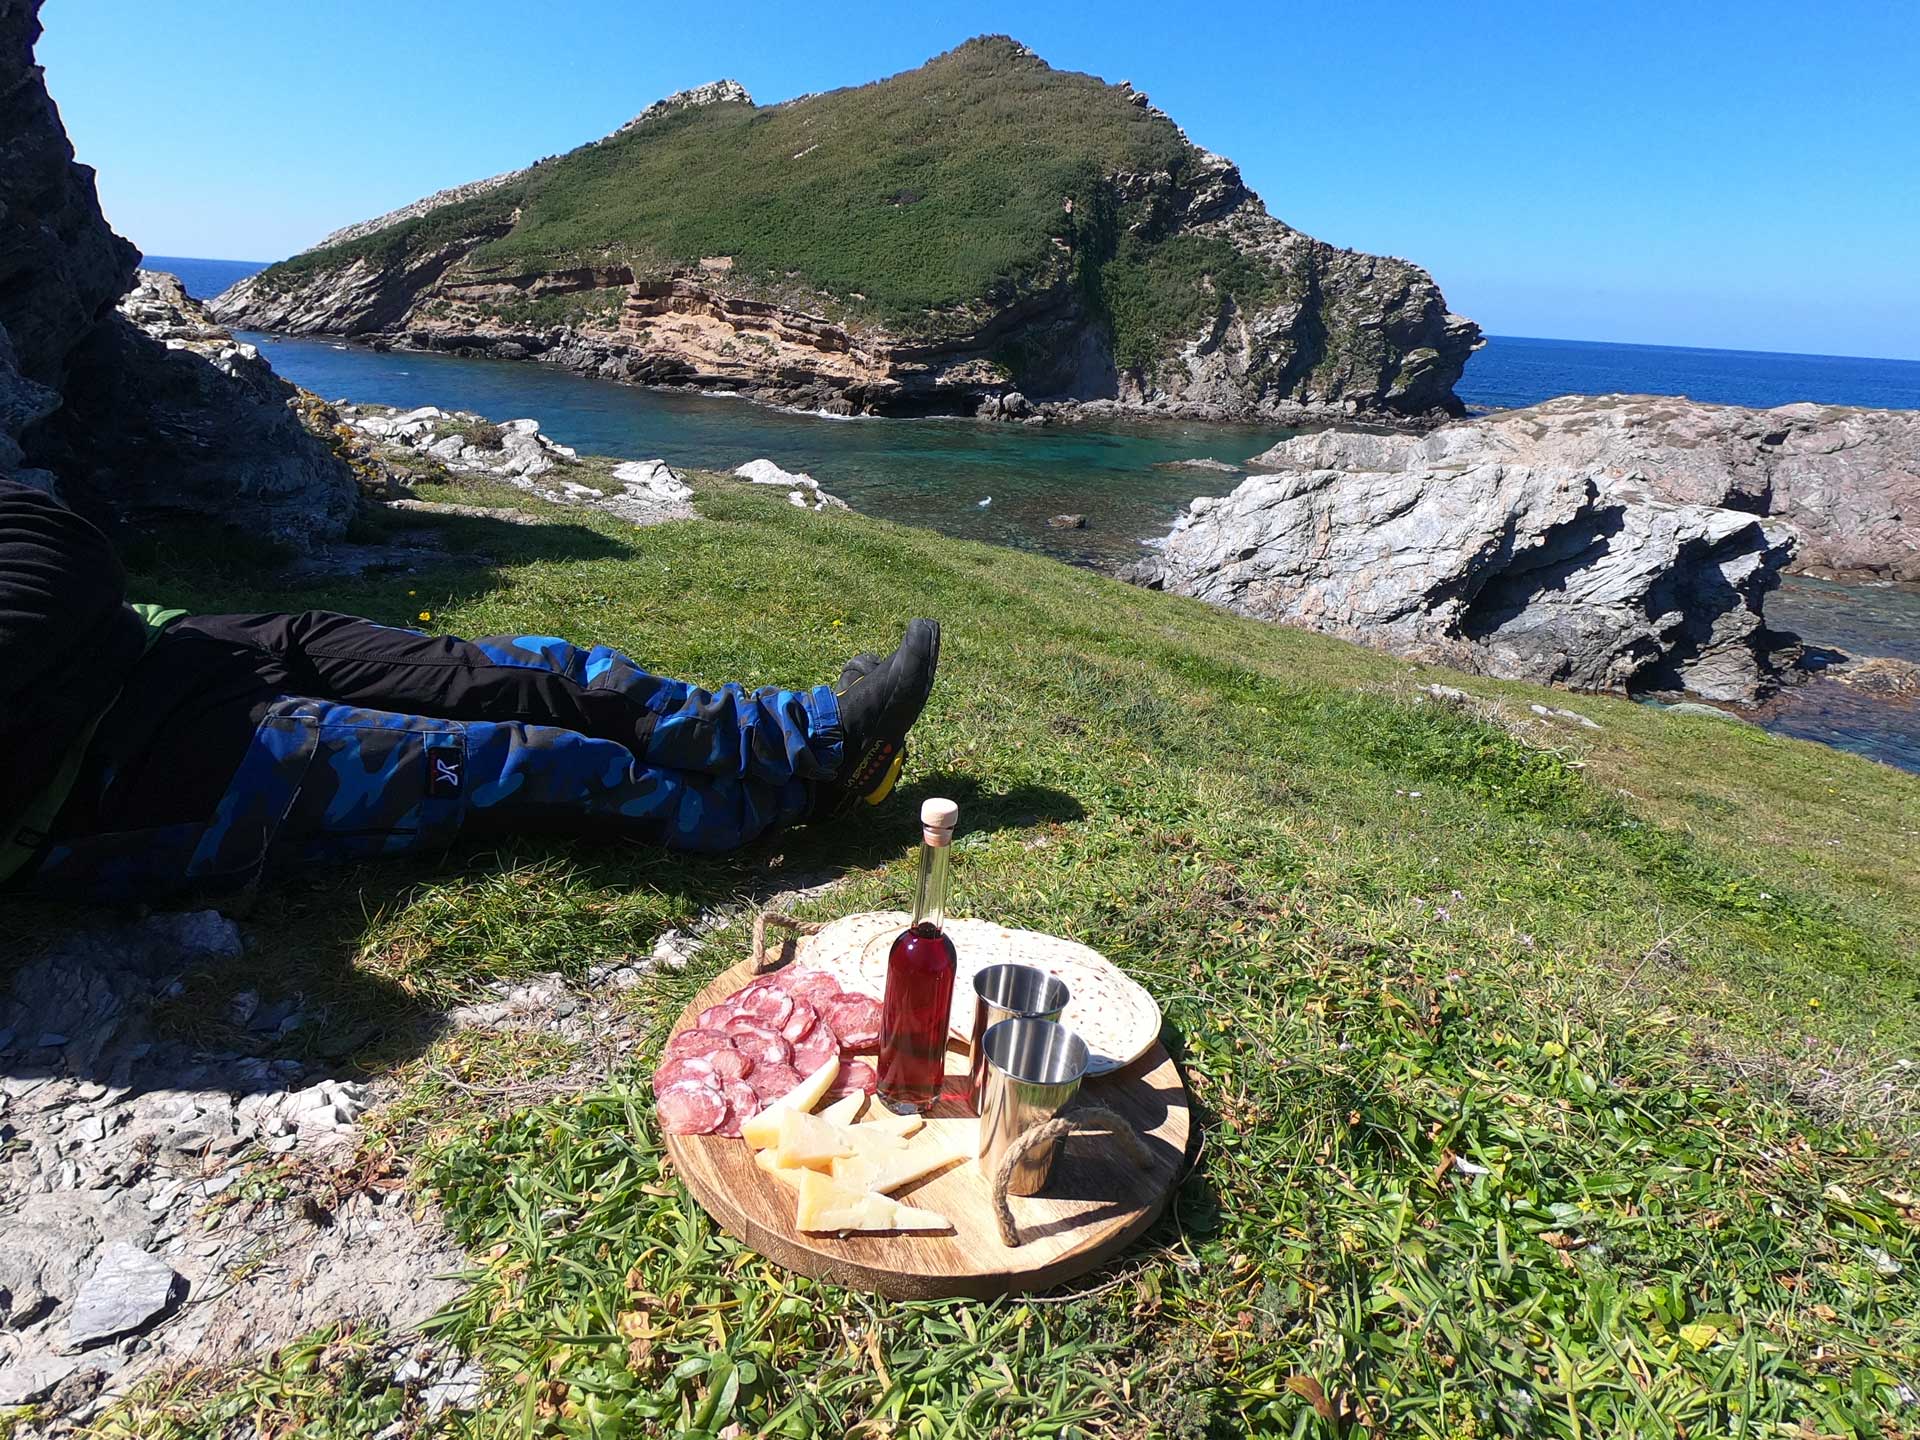 Sardinian aperitif with a view during trekking with in the territory of Alghero